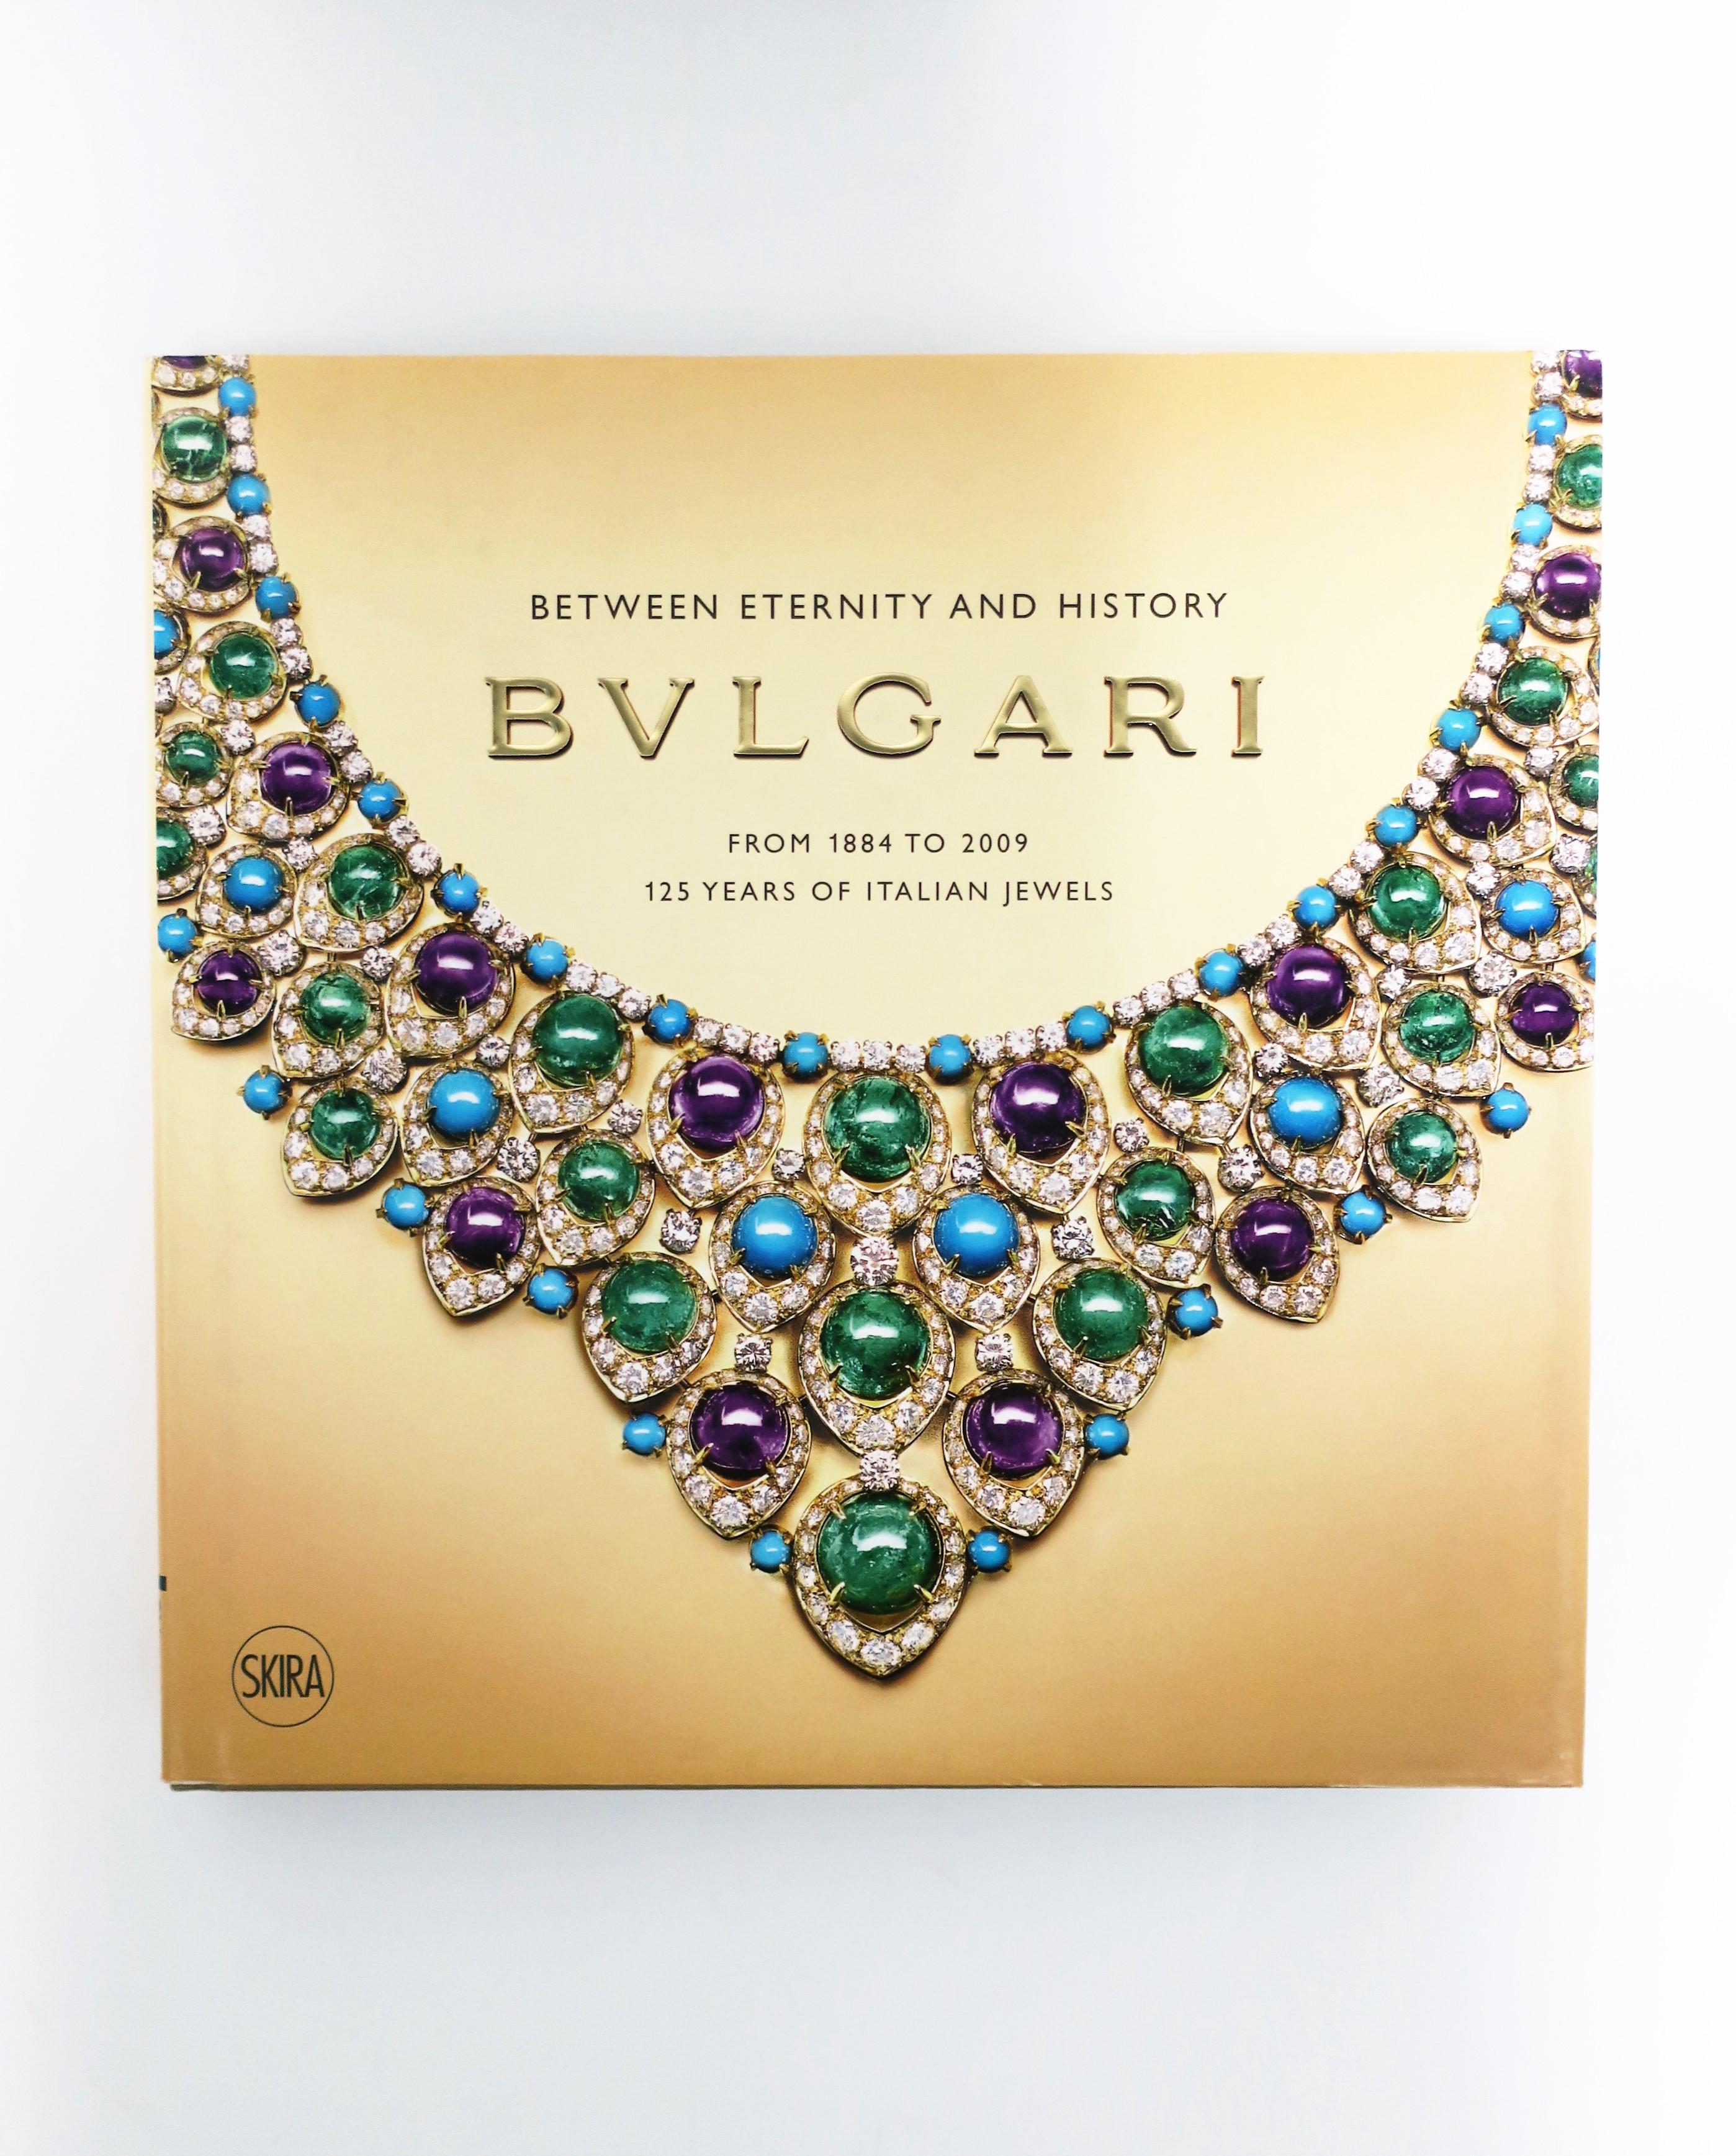 Bulgari Between Eternity and History Jewelry Coffee Table or Library Book  For Sale at 1stDibs | bulgari jewelry history, bulgari history, bulgari book